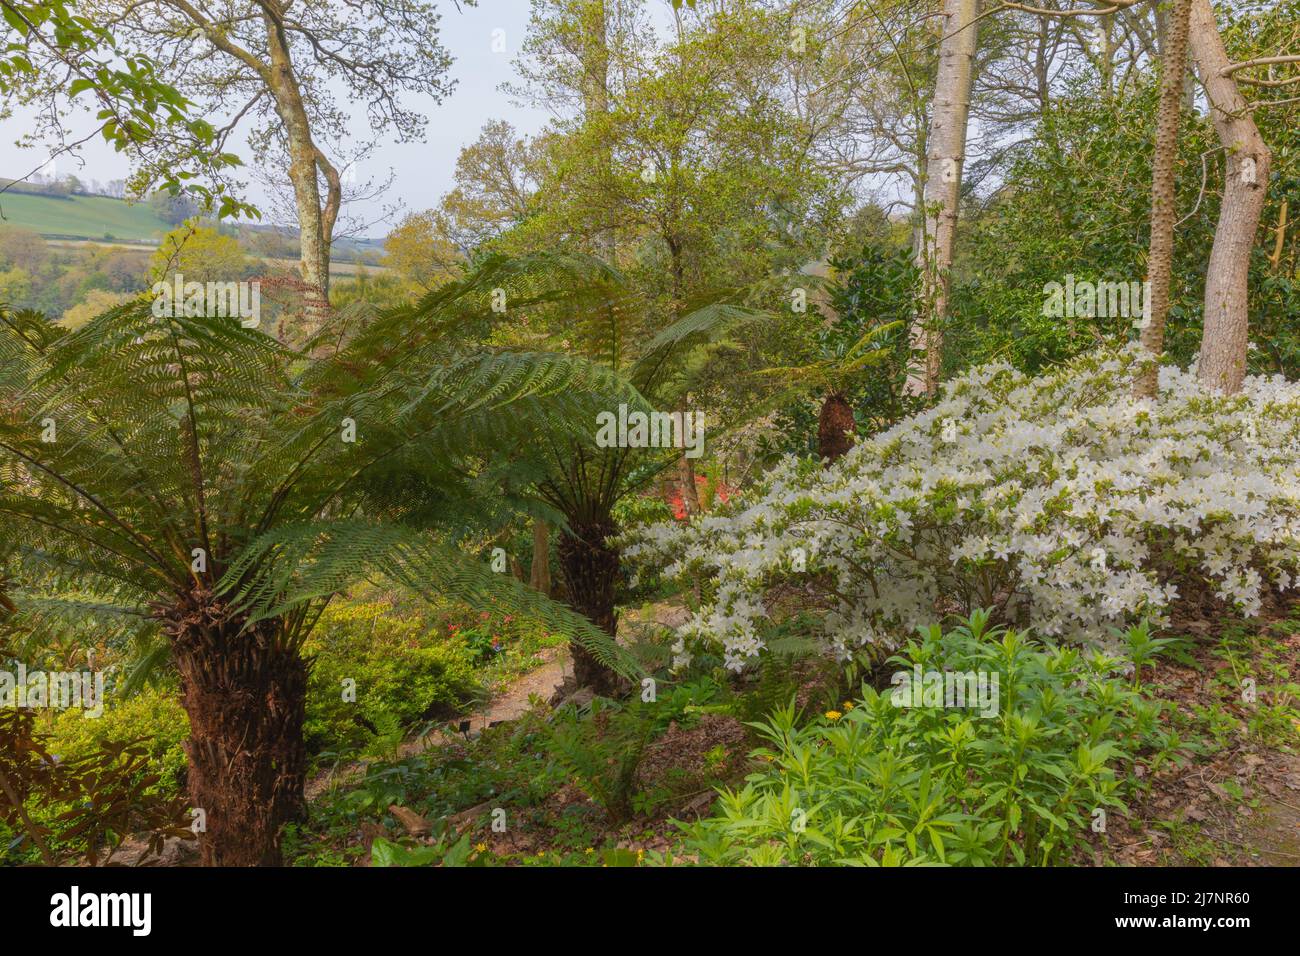 Green fronds of the dicksonia antartica and the white flowers on the rhododendron palestrina Stock Photo